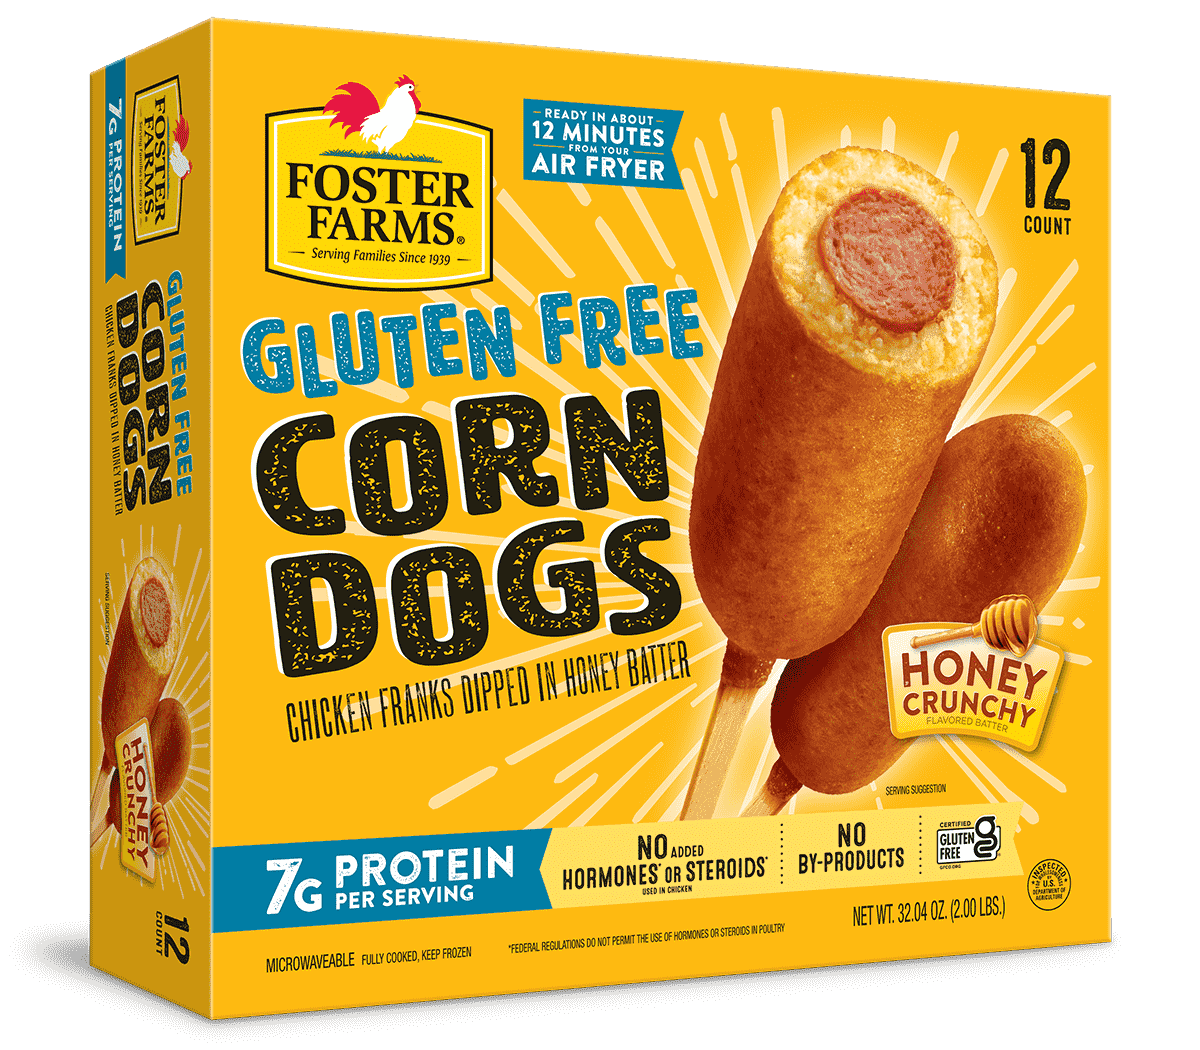 Gluten Free Corn Dogs Honey Crunchy 12 ct - Products - Foster Farms